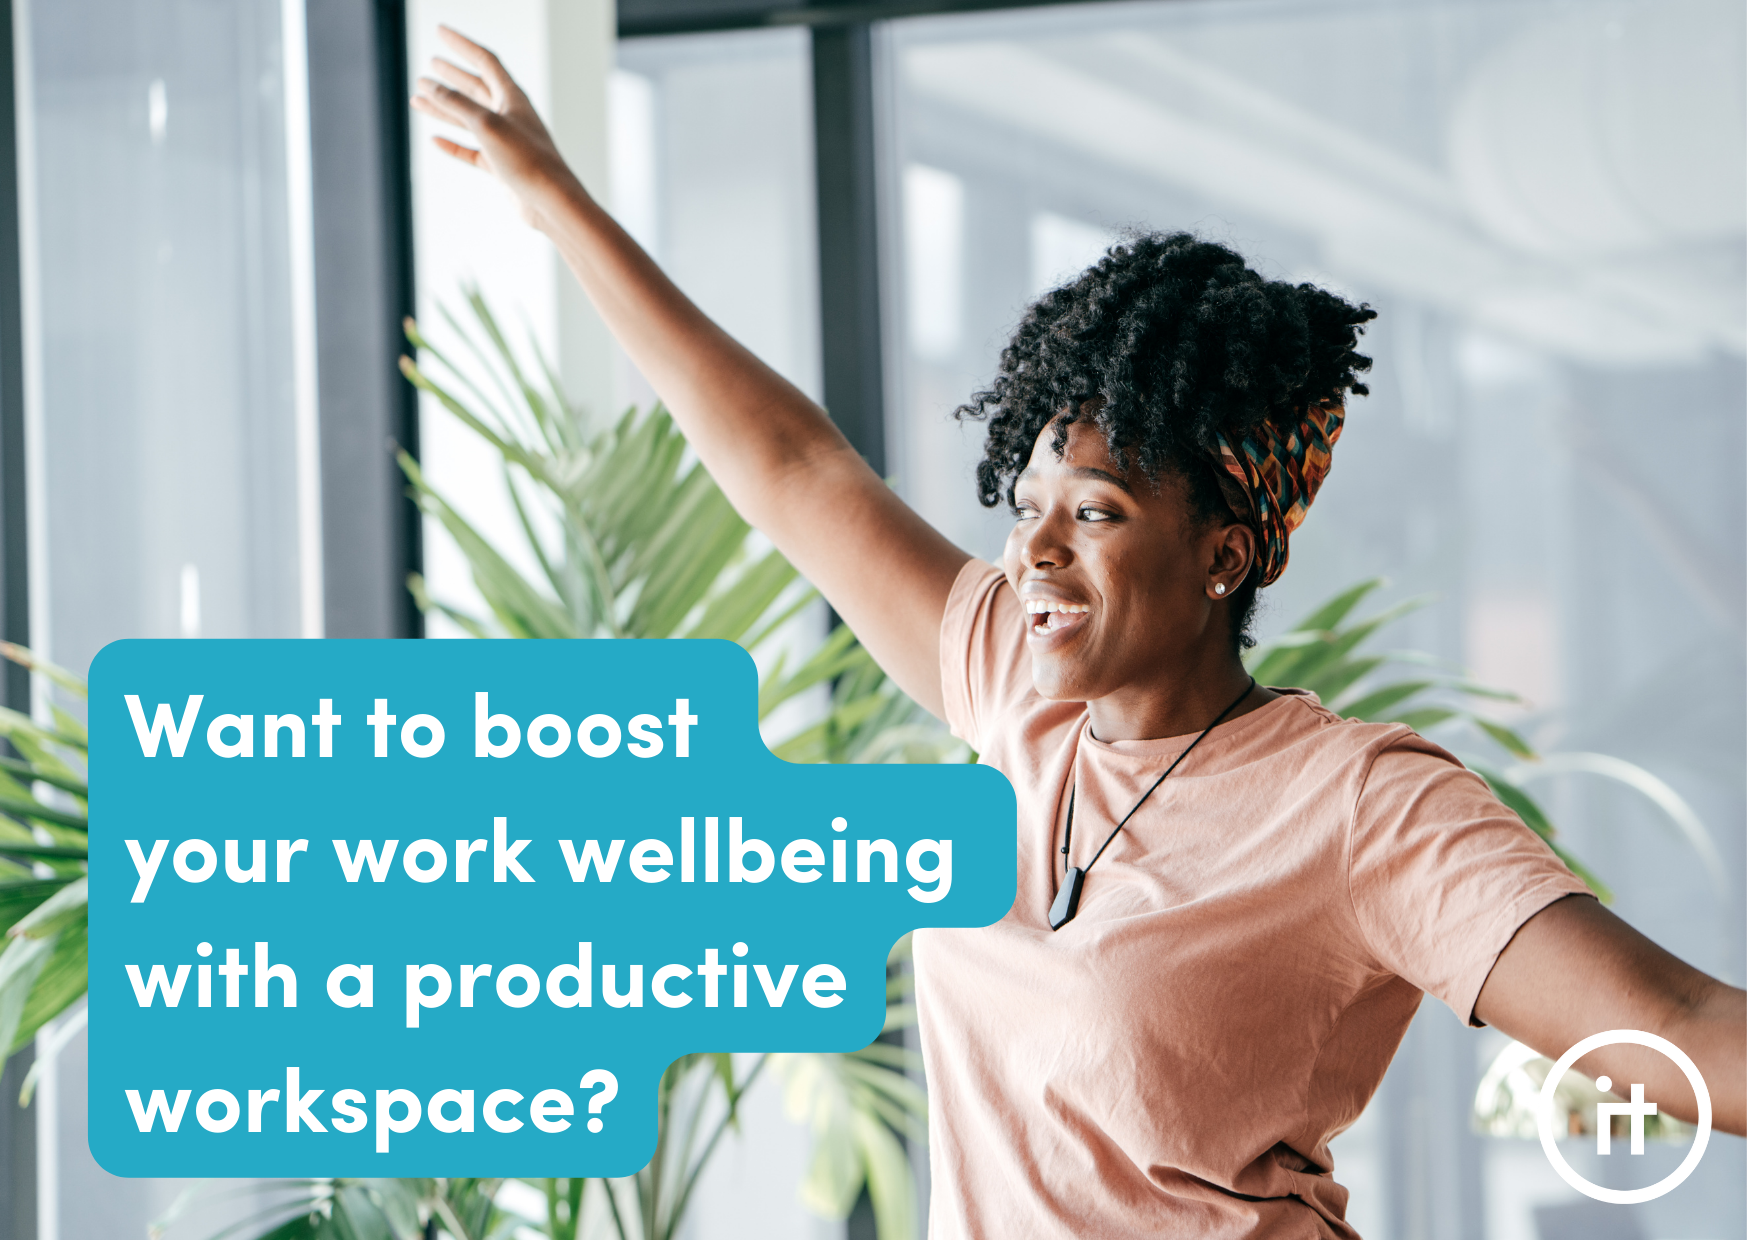 How to boost your work wellbeing with a productive workspace